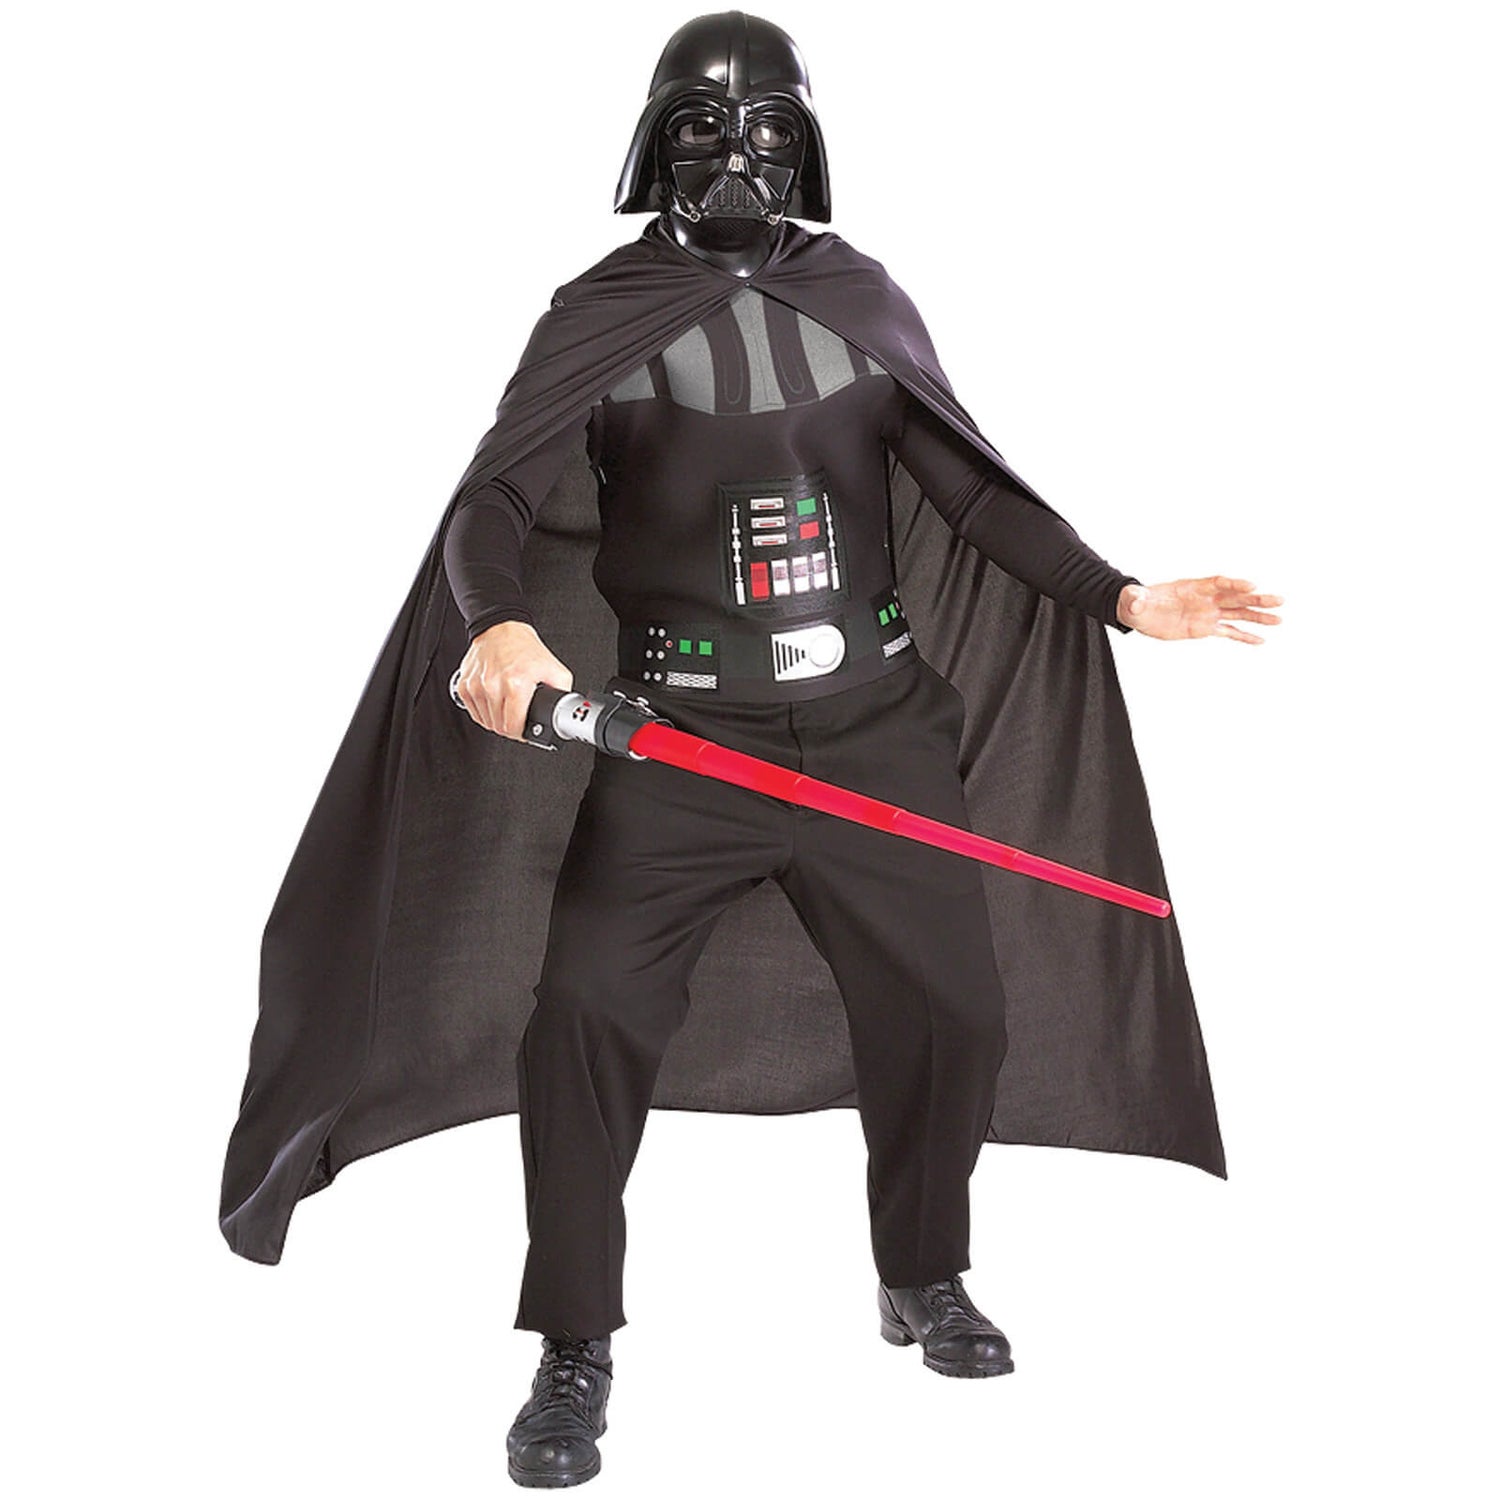 Official Rubies Star Wars Darth Vader With Light Saber Adult Costume - One Size